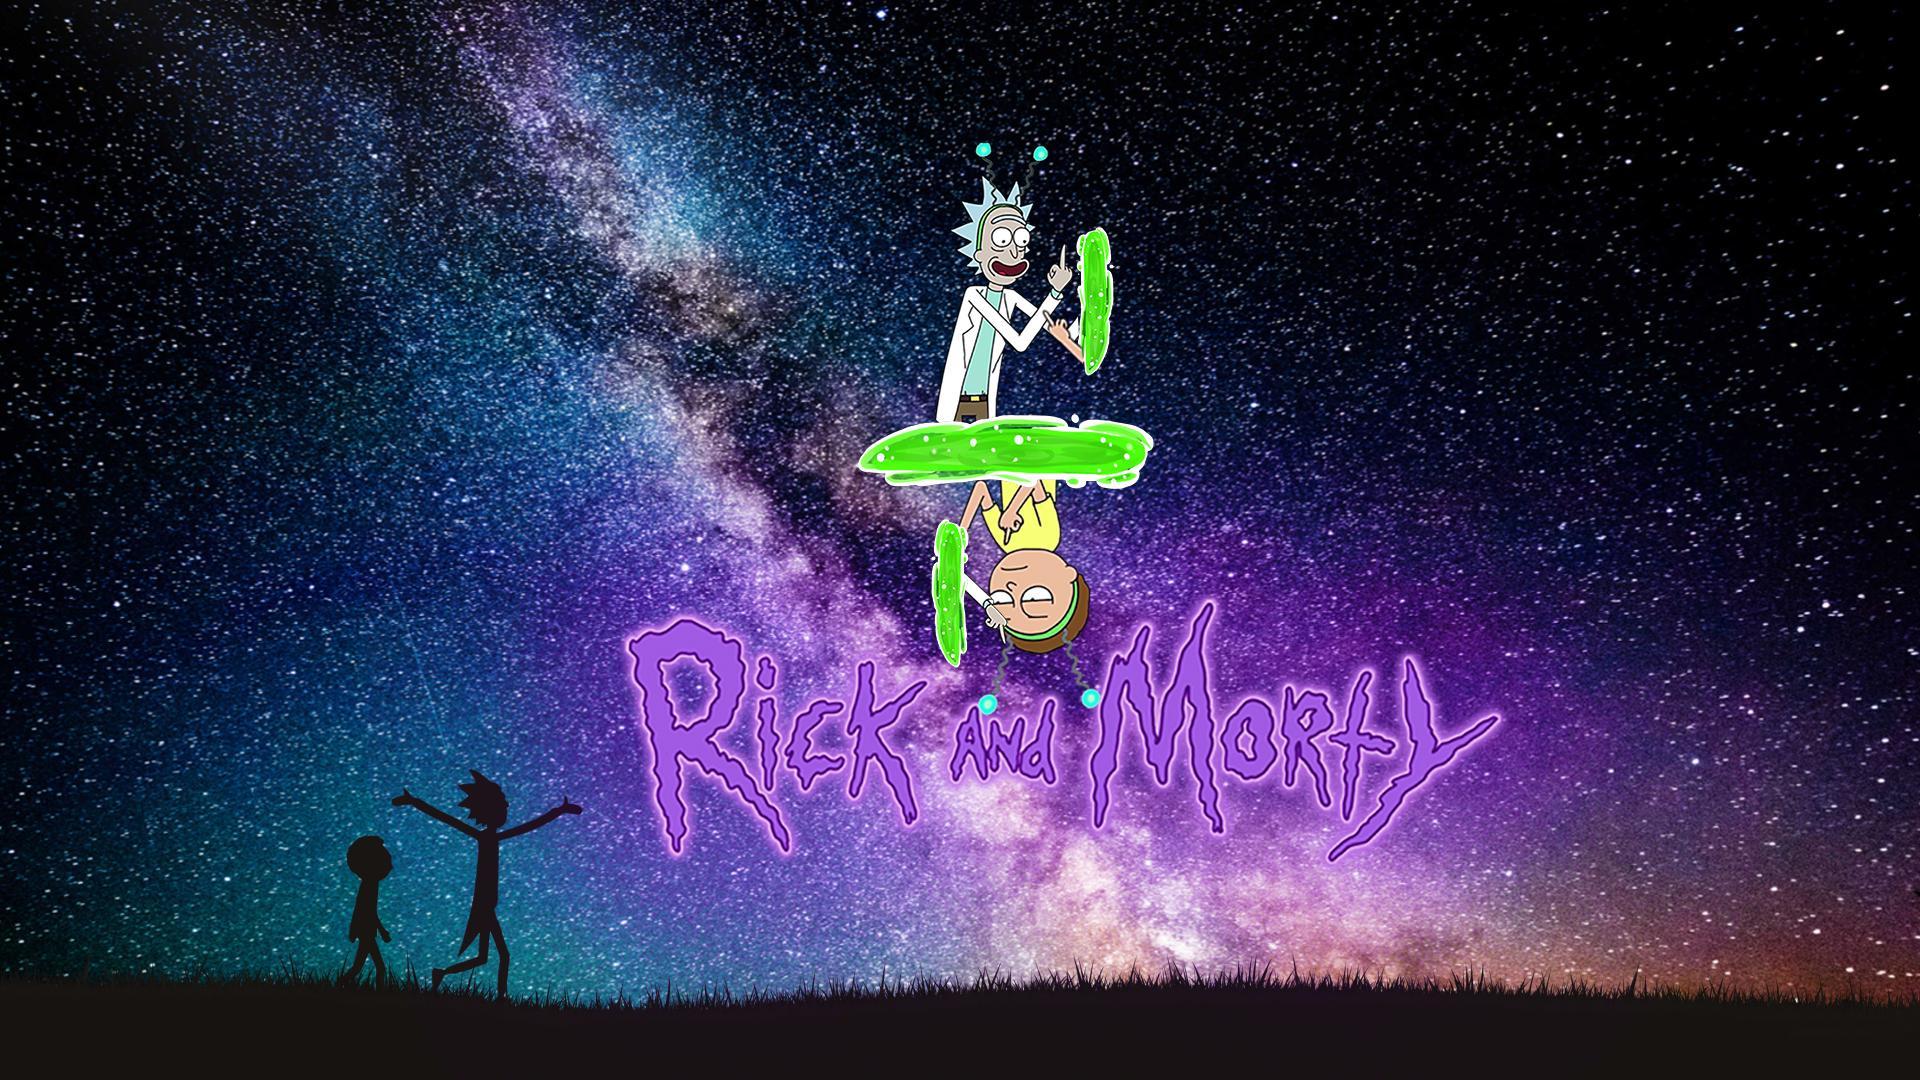 Best Rick and Morty Wallpapers - Top